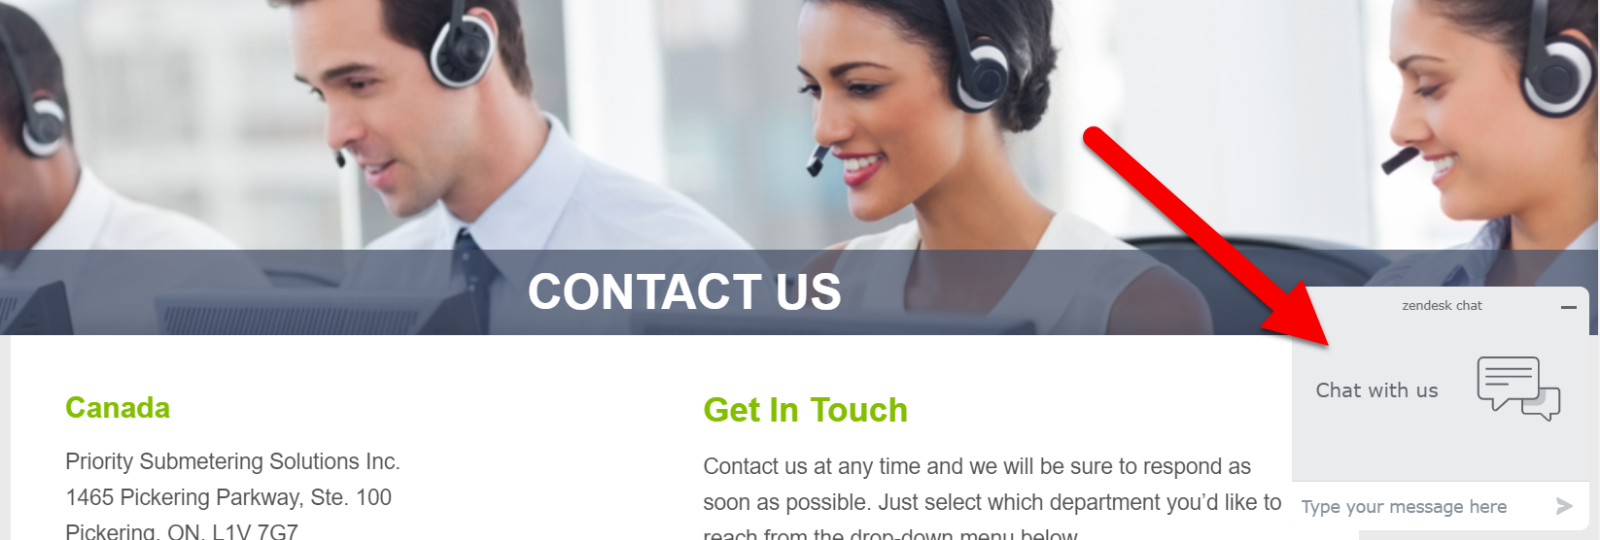 contact us web page with live chat icon